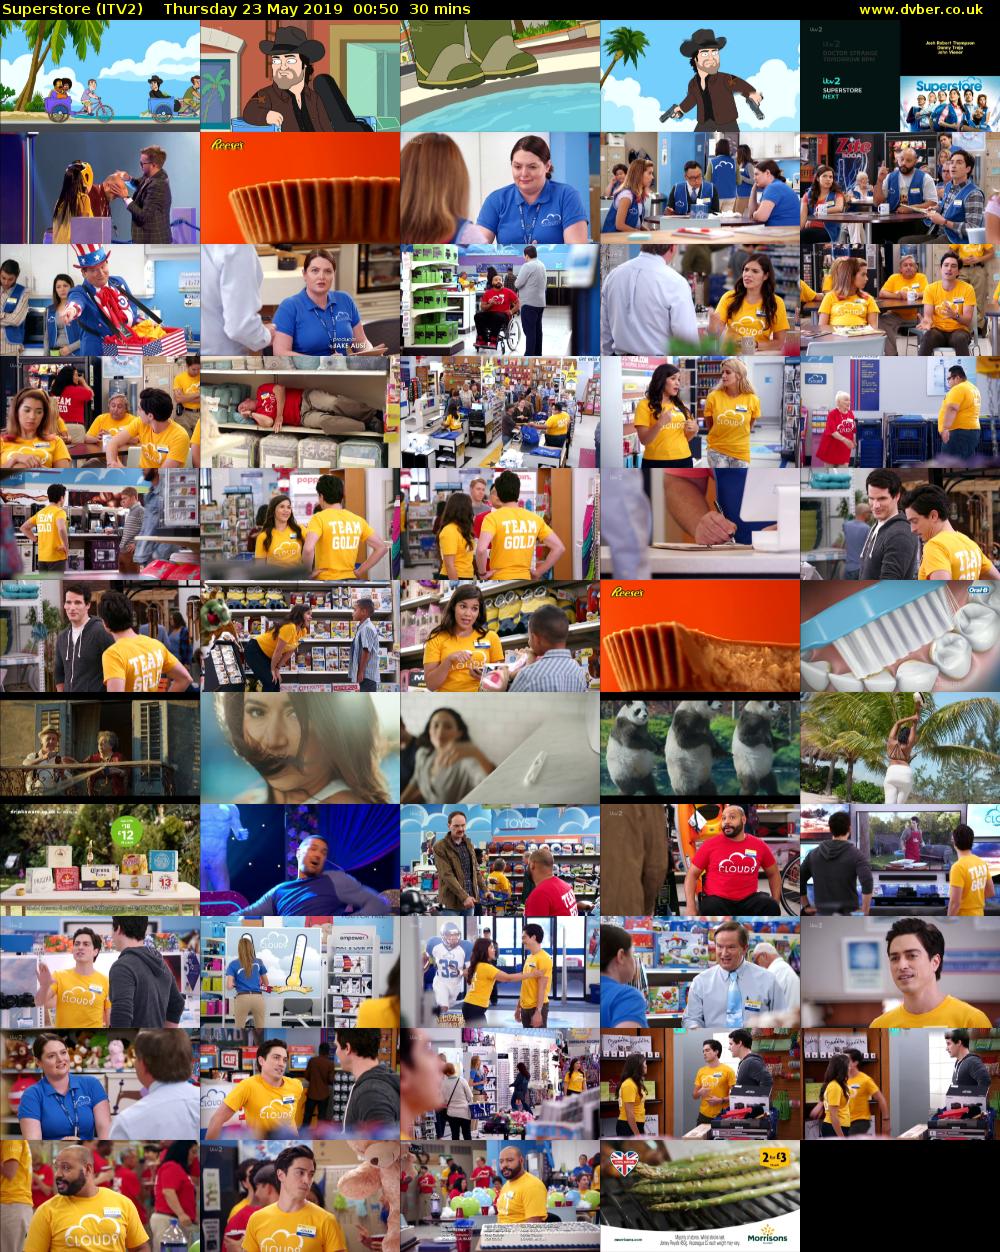 Superstore (ITV2) Thursday 23 May 2019 00:50 - 01:20